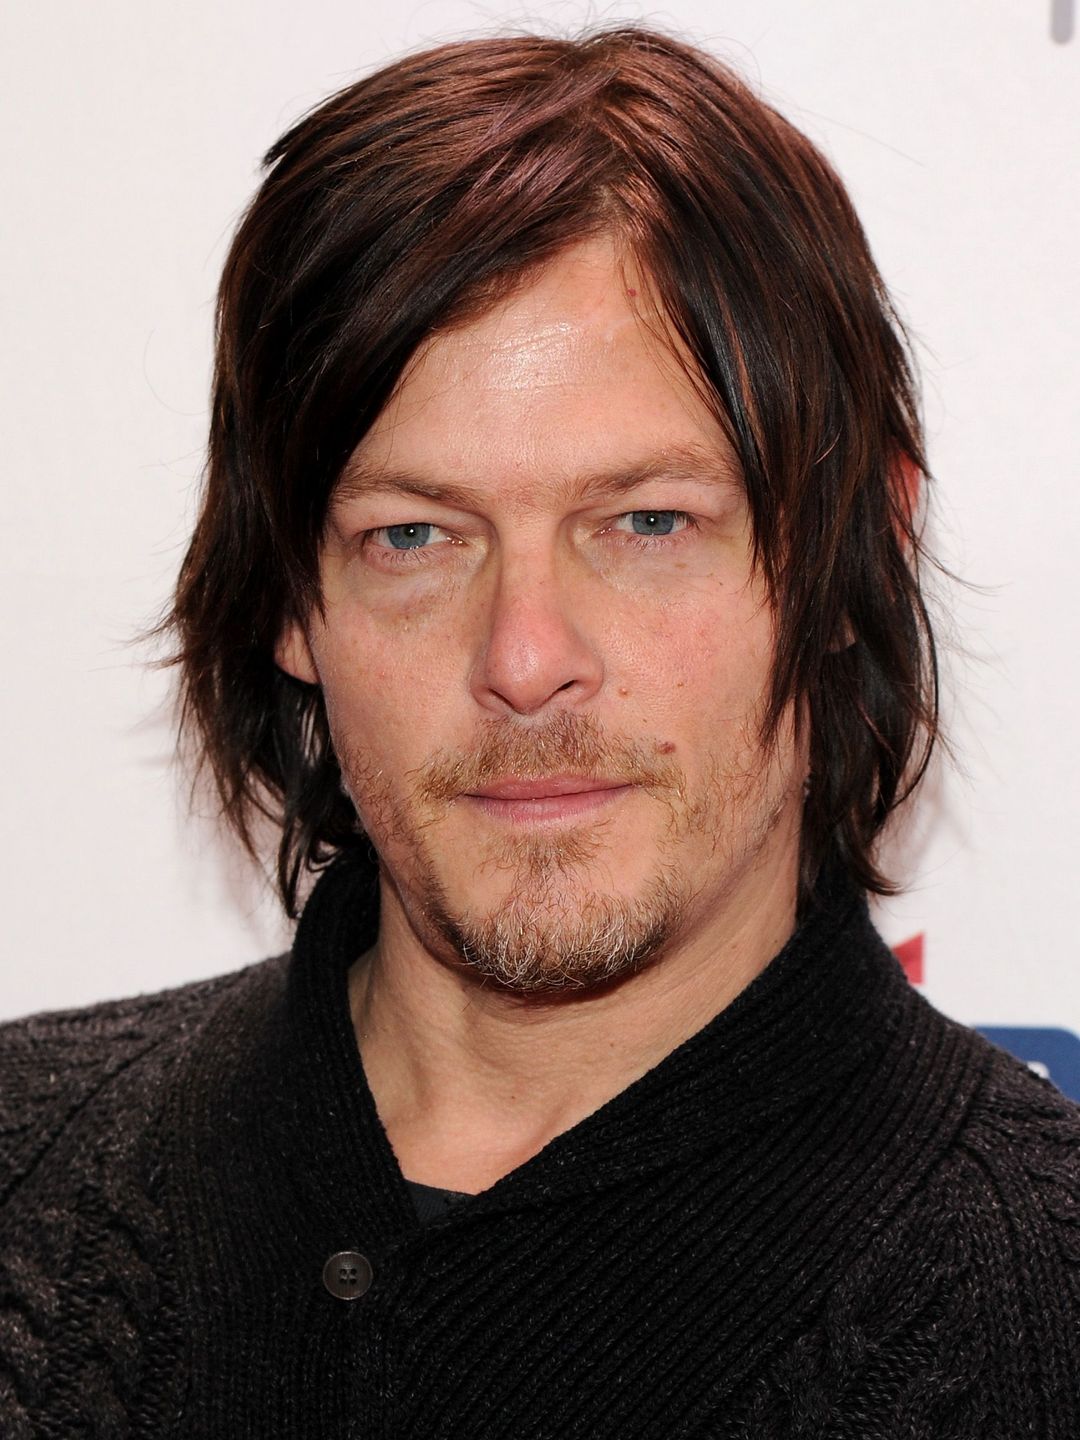 Norman Reedus who is his father